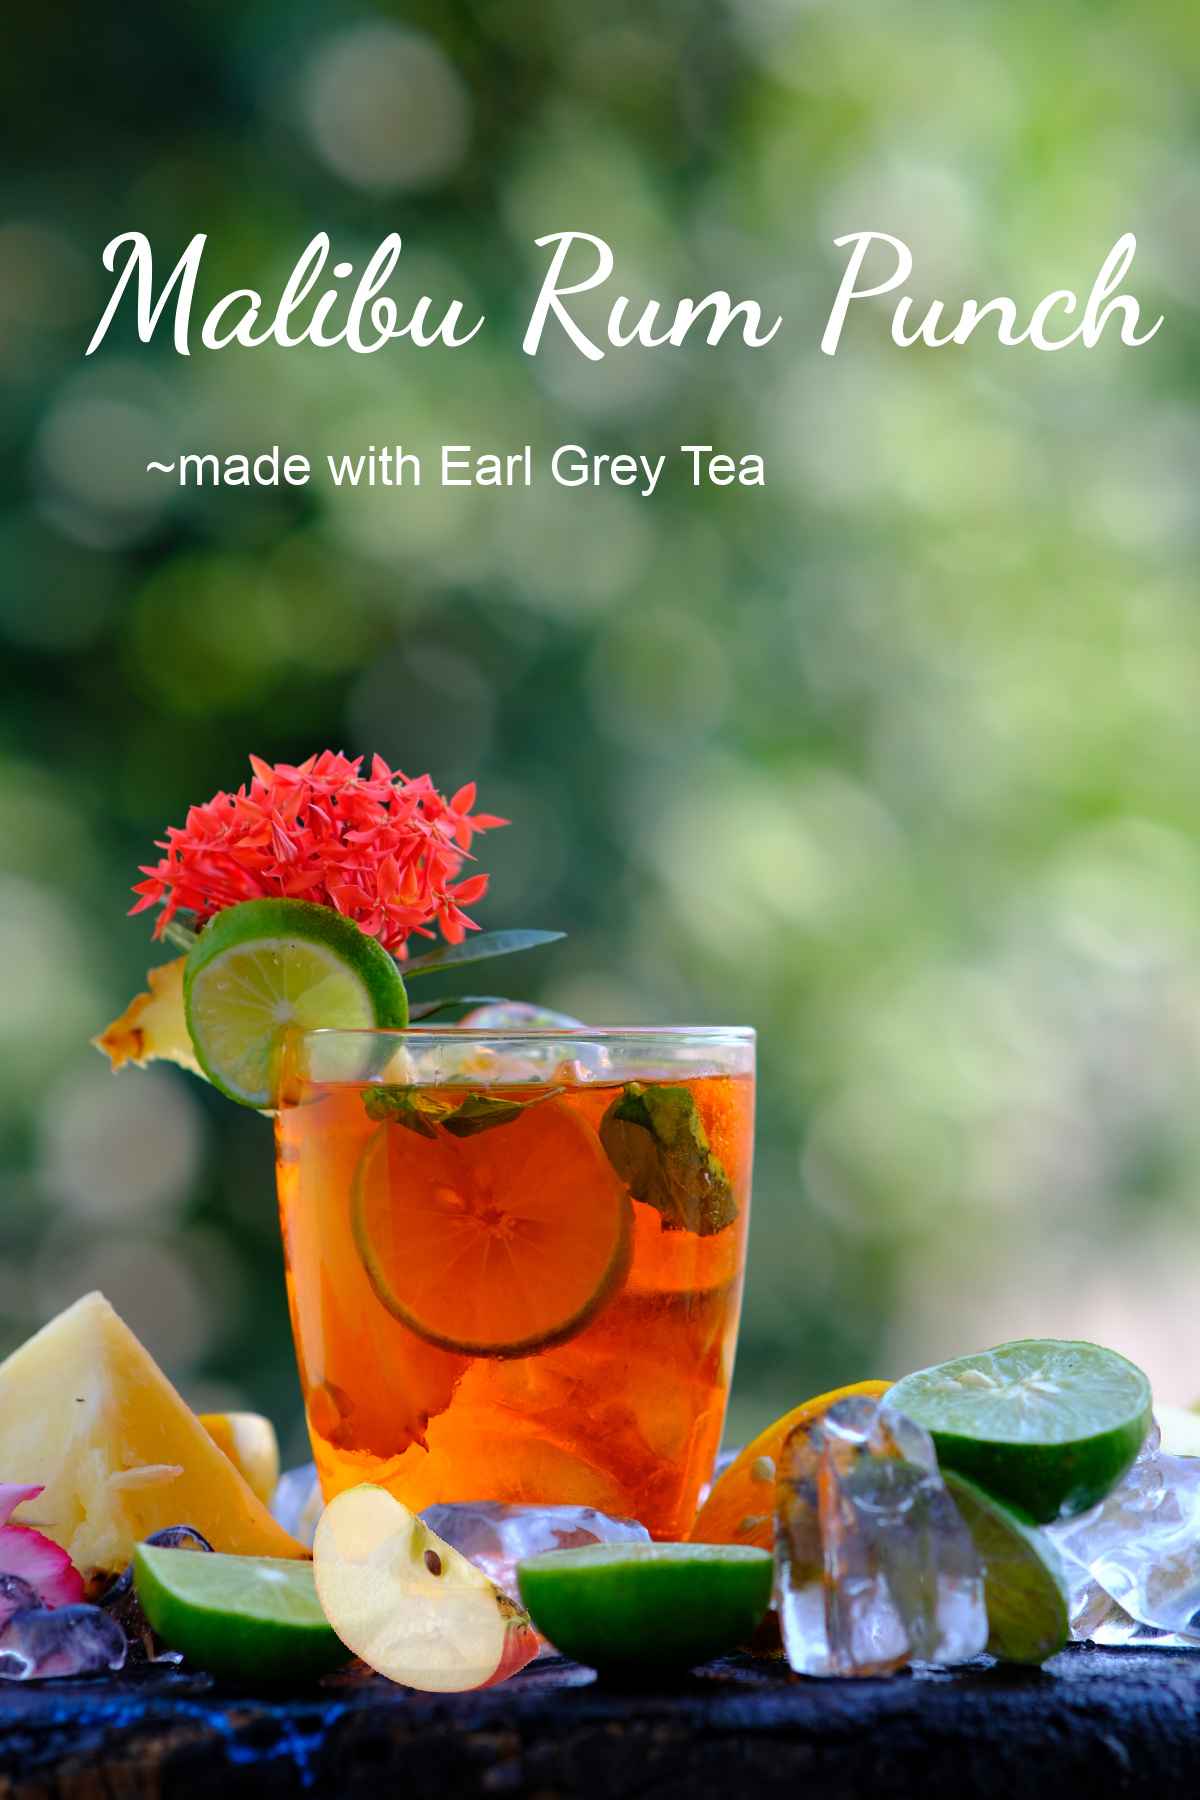 Fruity rum punch with words Malibu Rum Punch with Earl Grey tea.